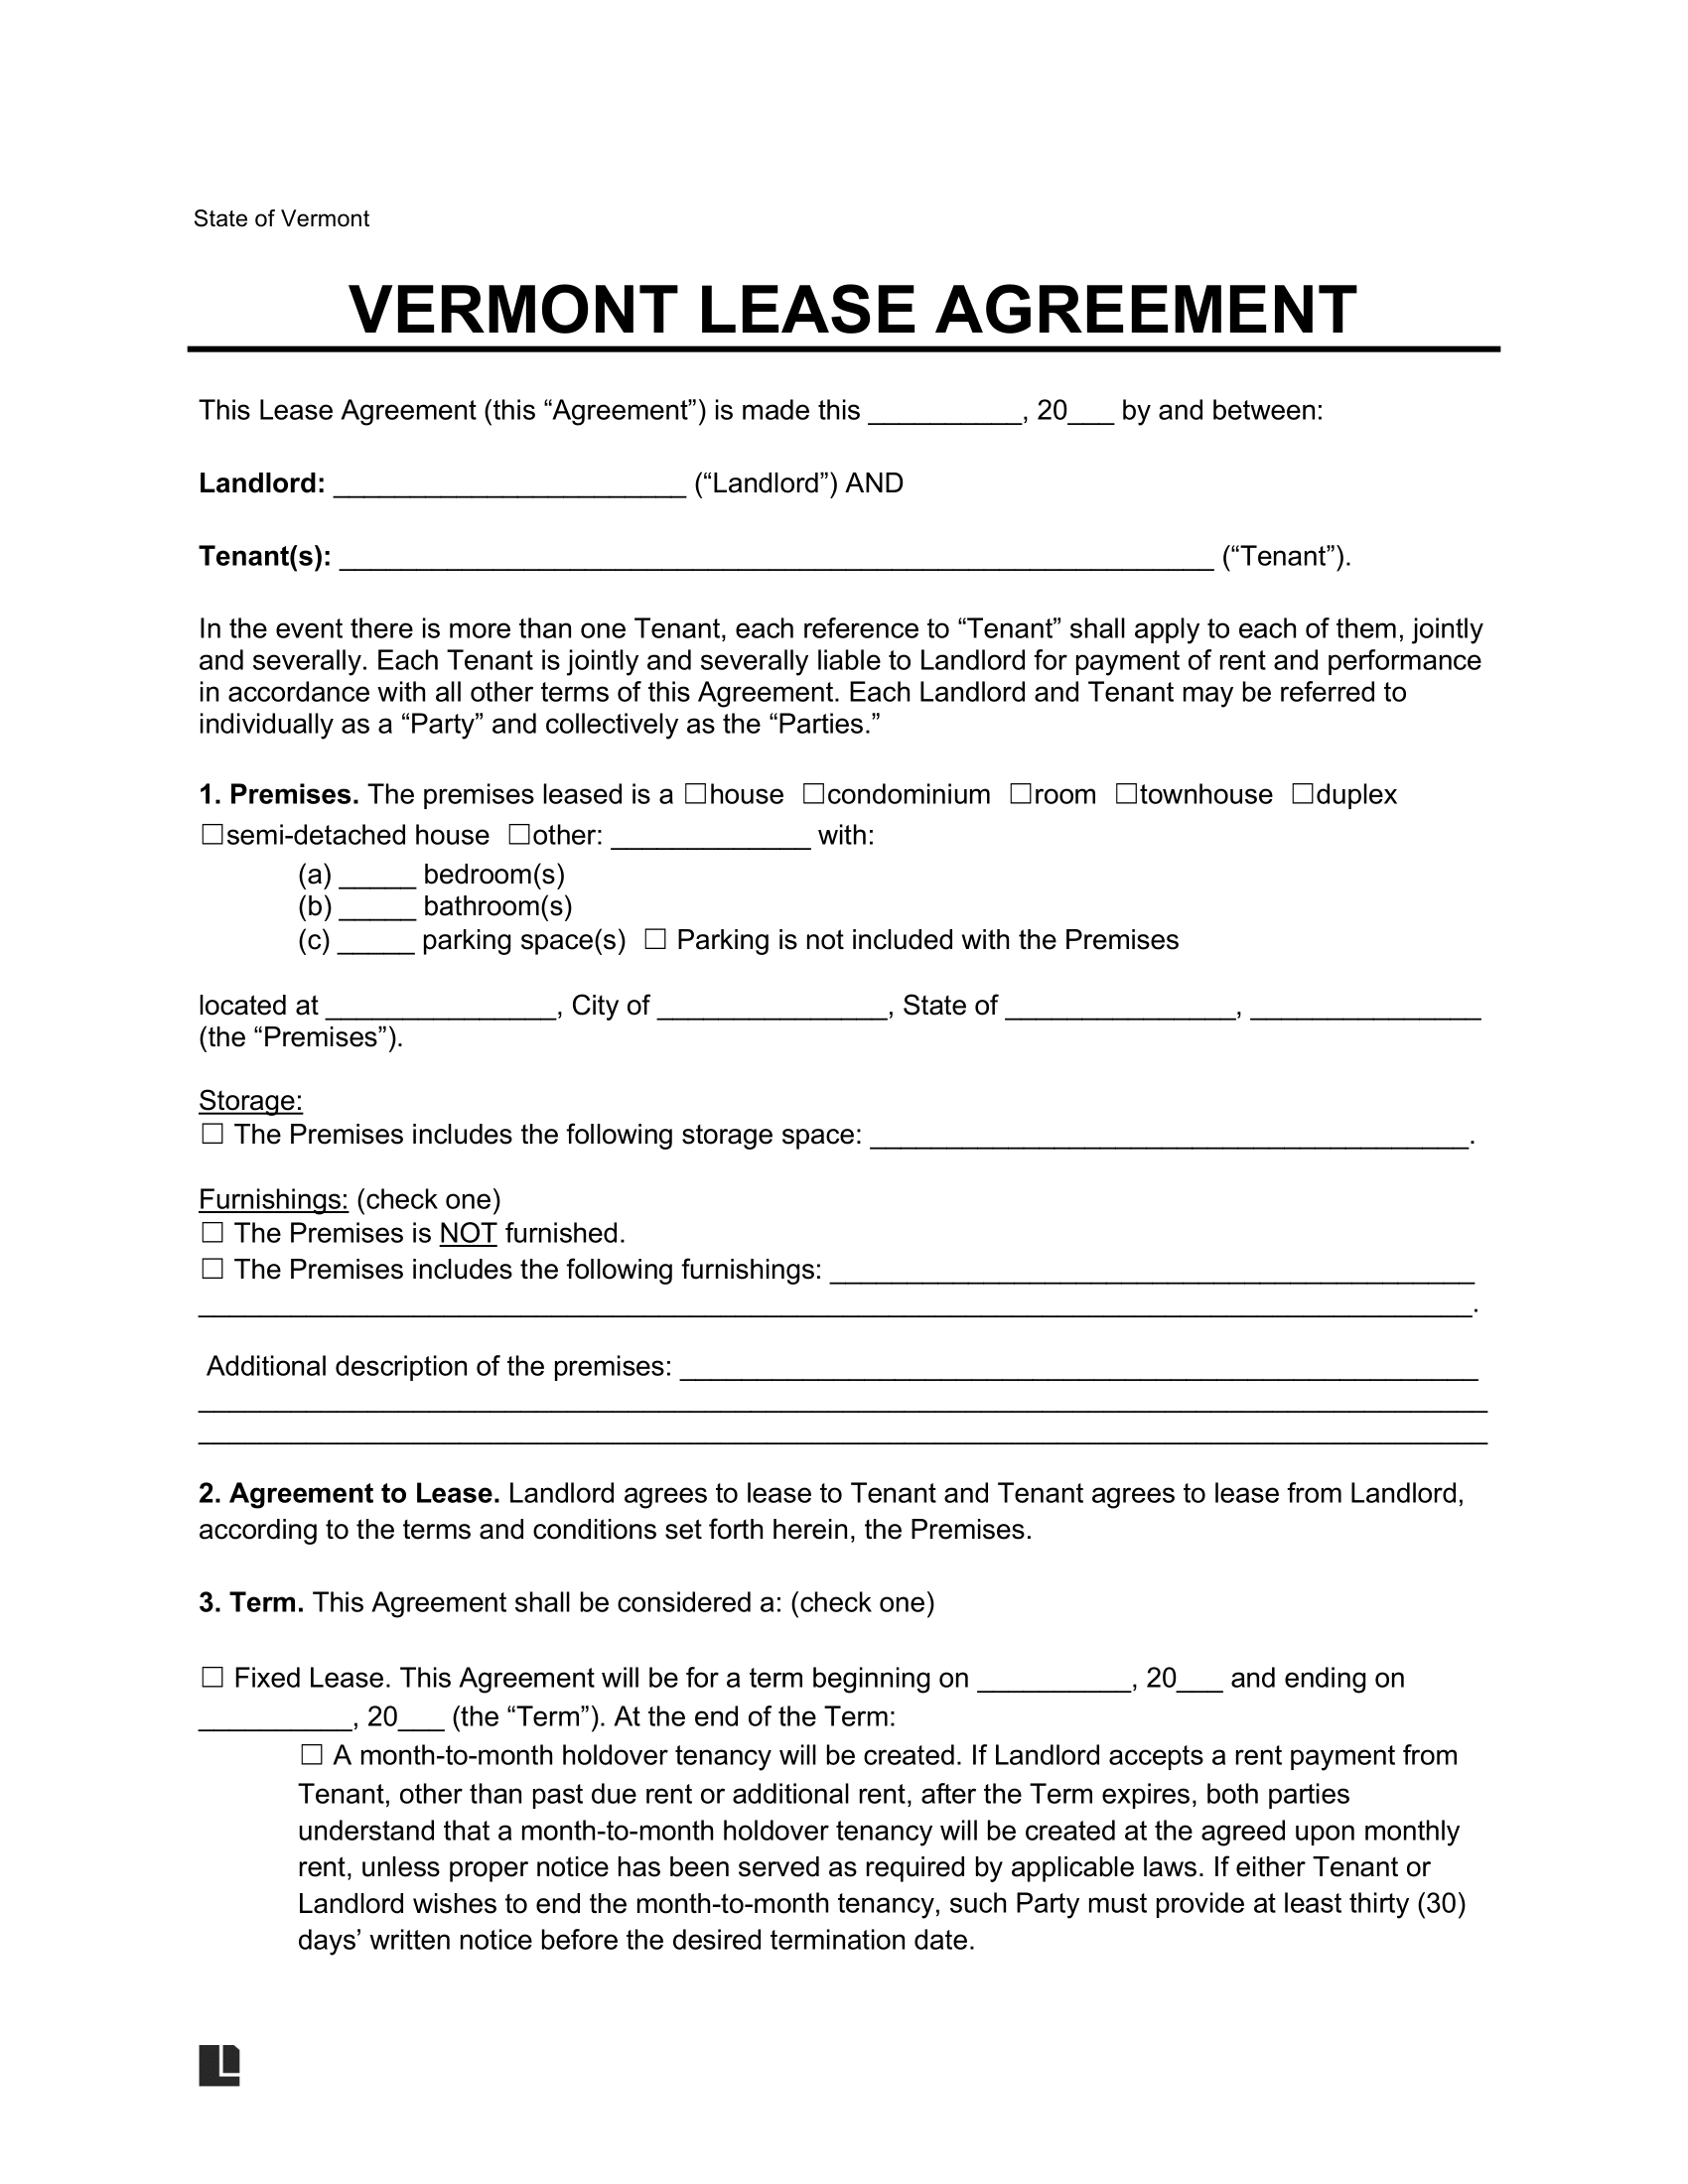 Vermont Standard Residential Lease Agreement